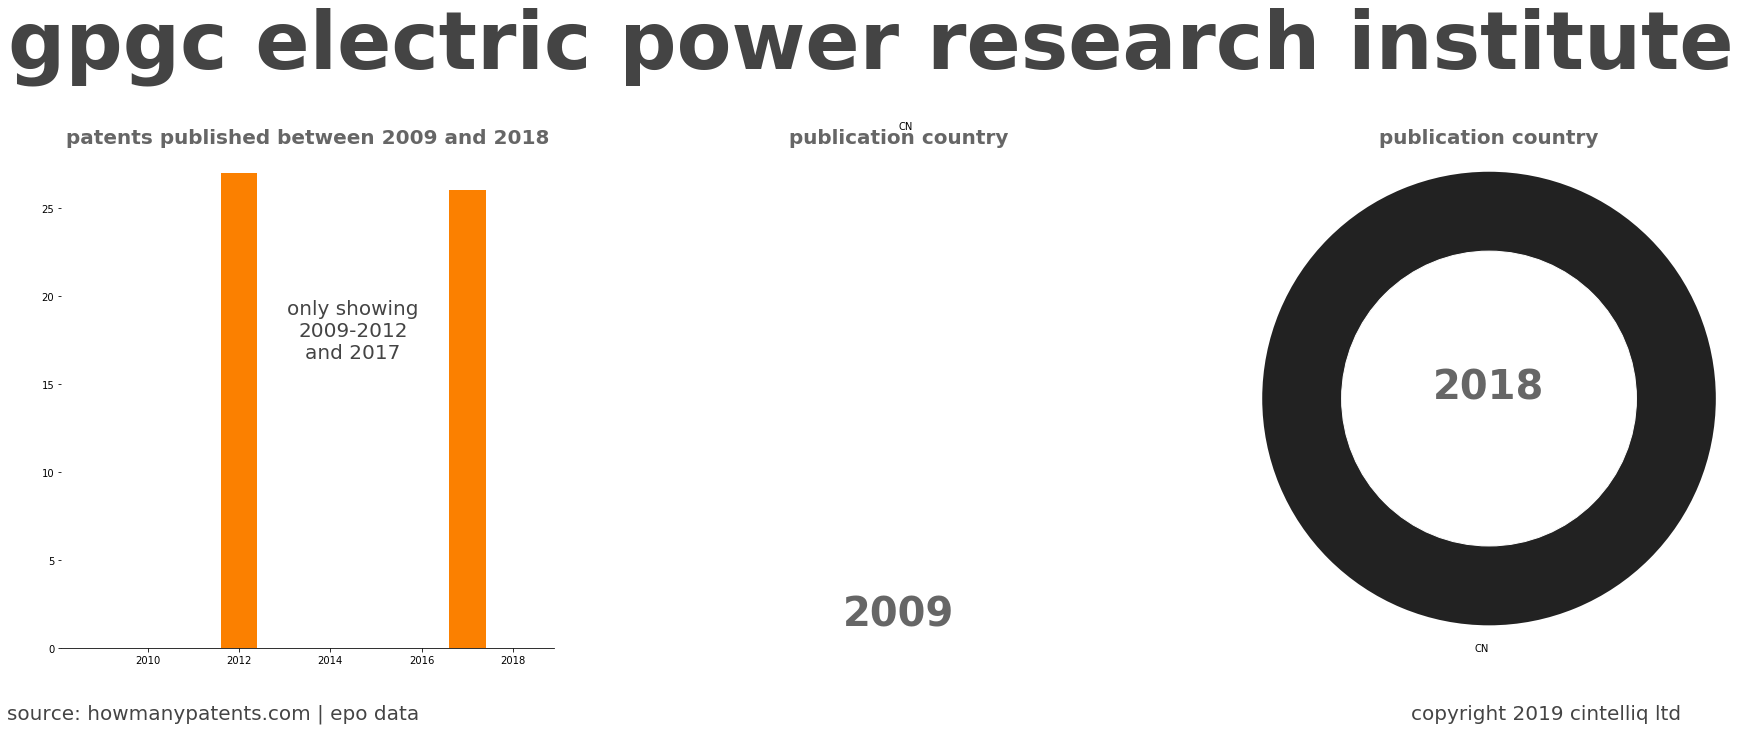 summary of patents for Gpgc Electric Power Research Institute